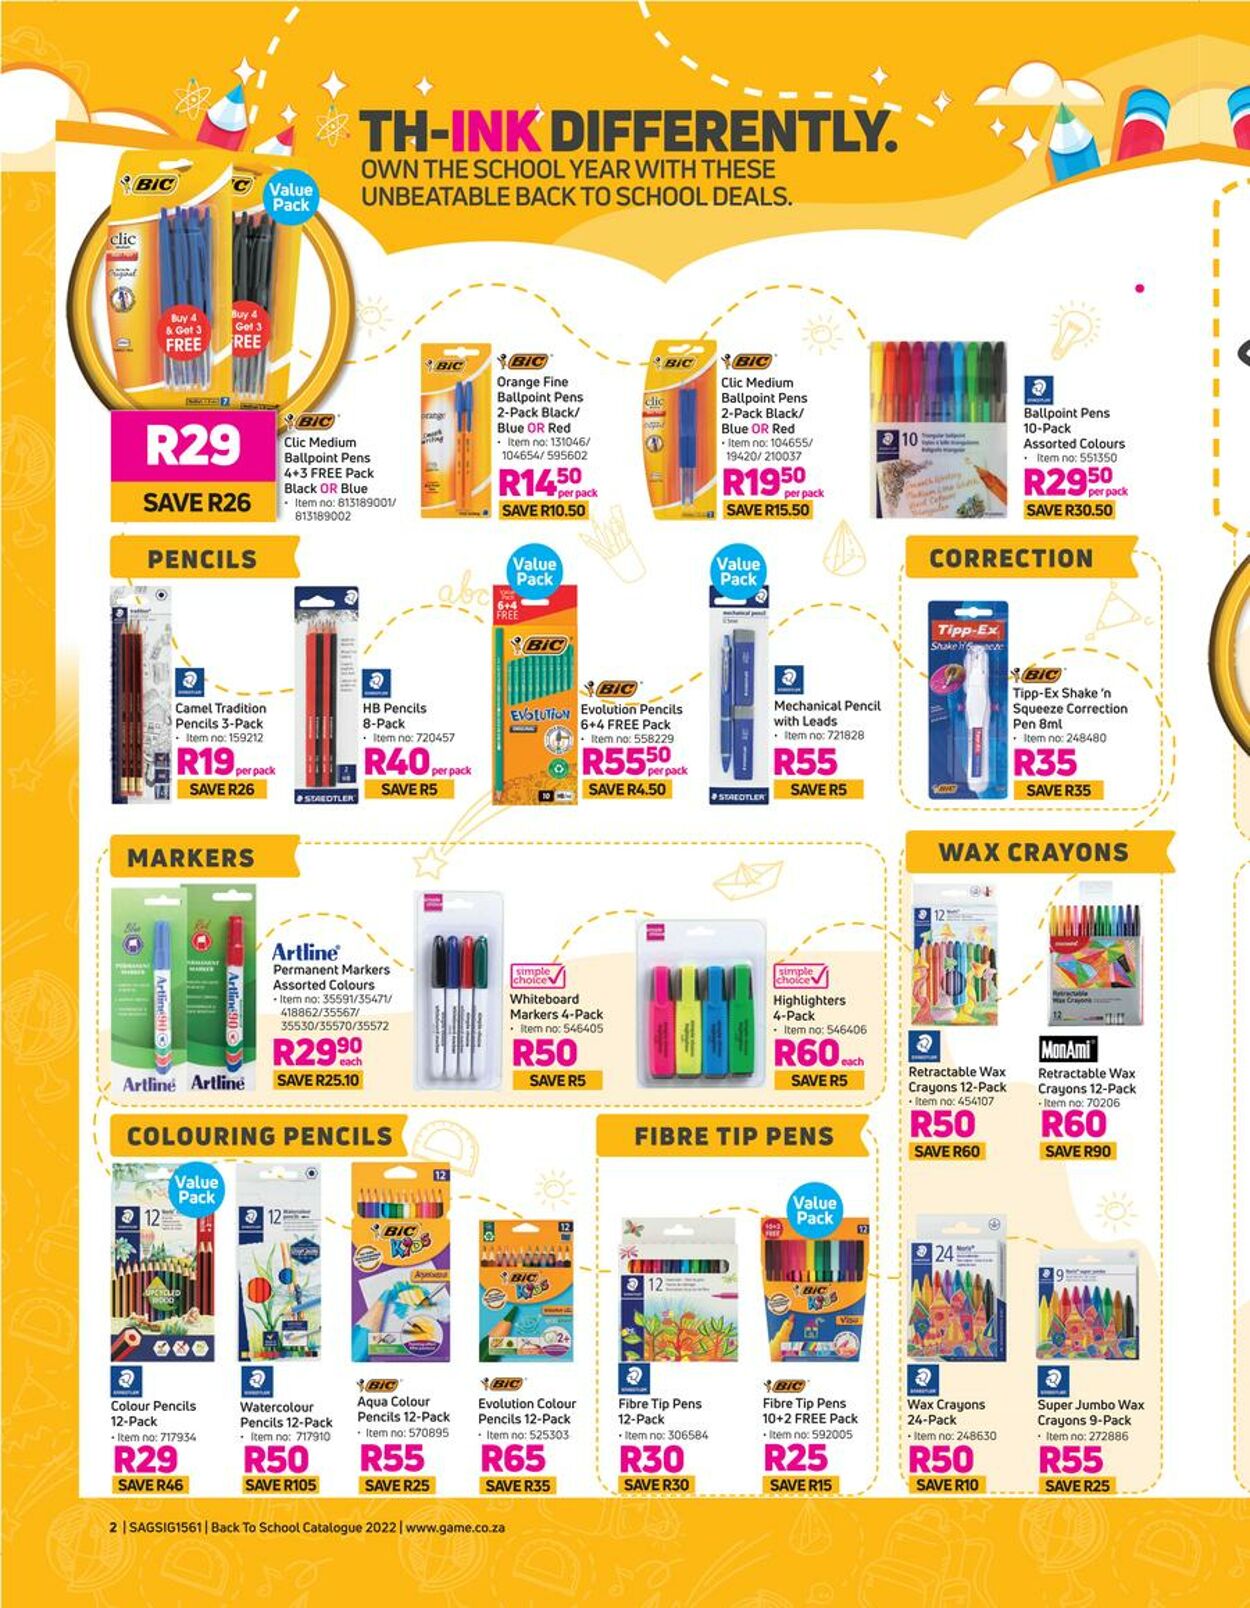 Game Promotional Leaflet - Back to School - Valid from 13.12 to 27.12 -  Page nb 1 